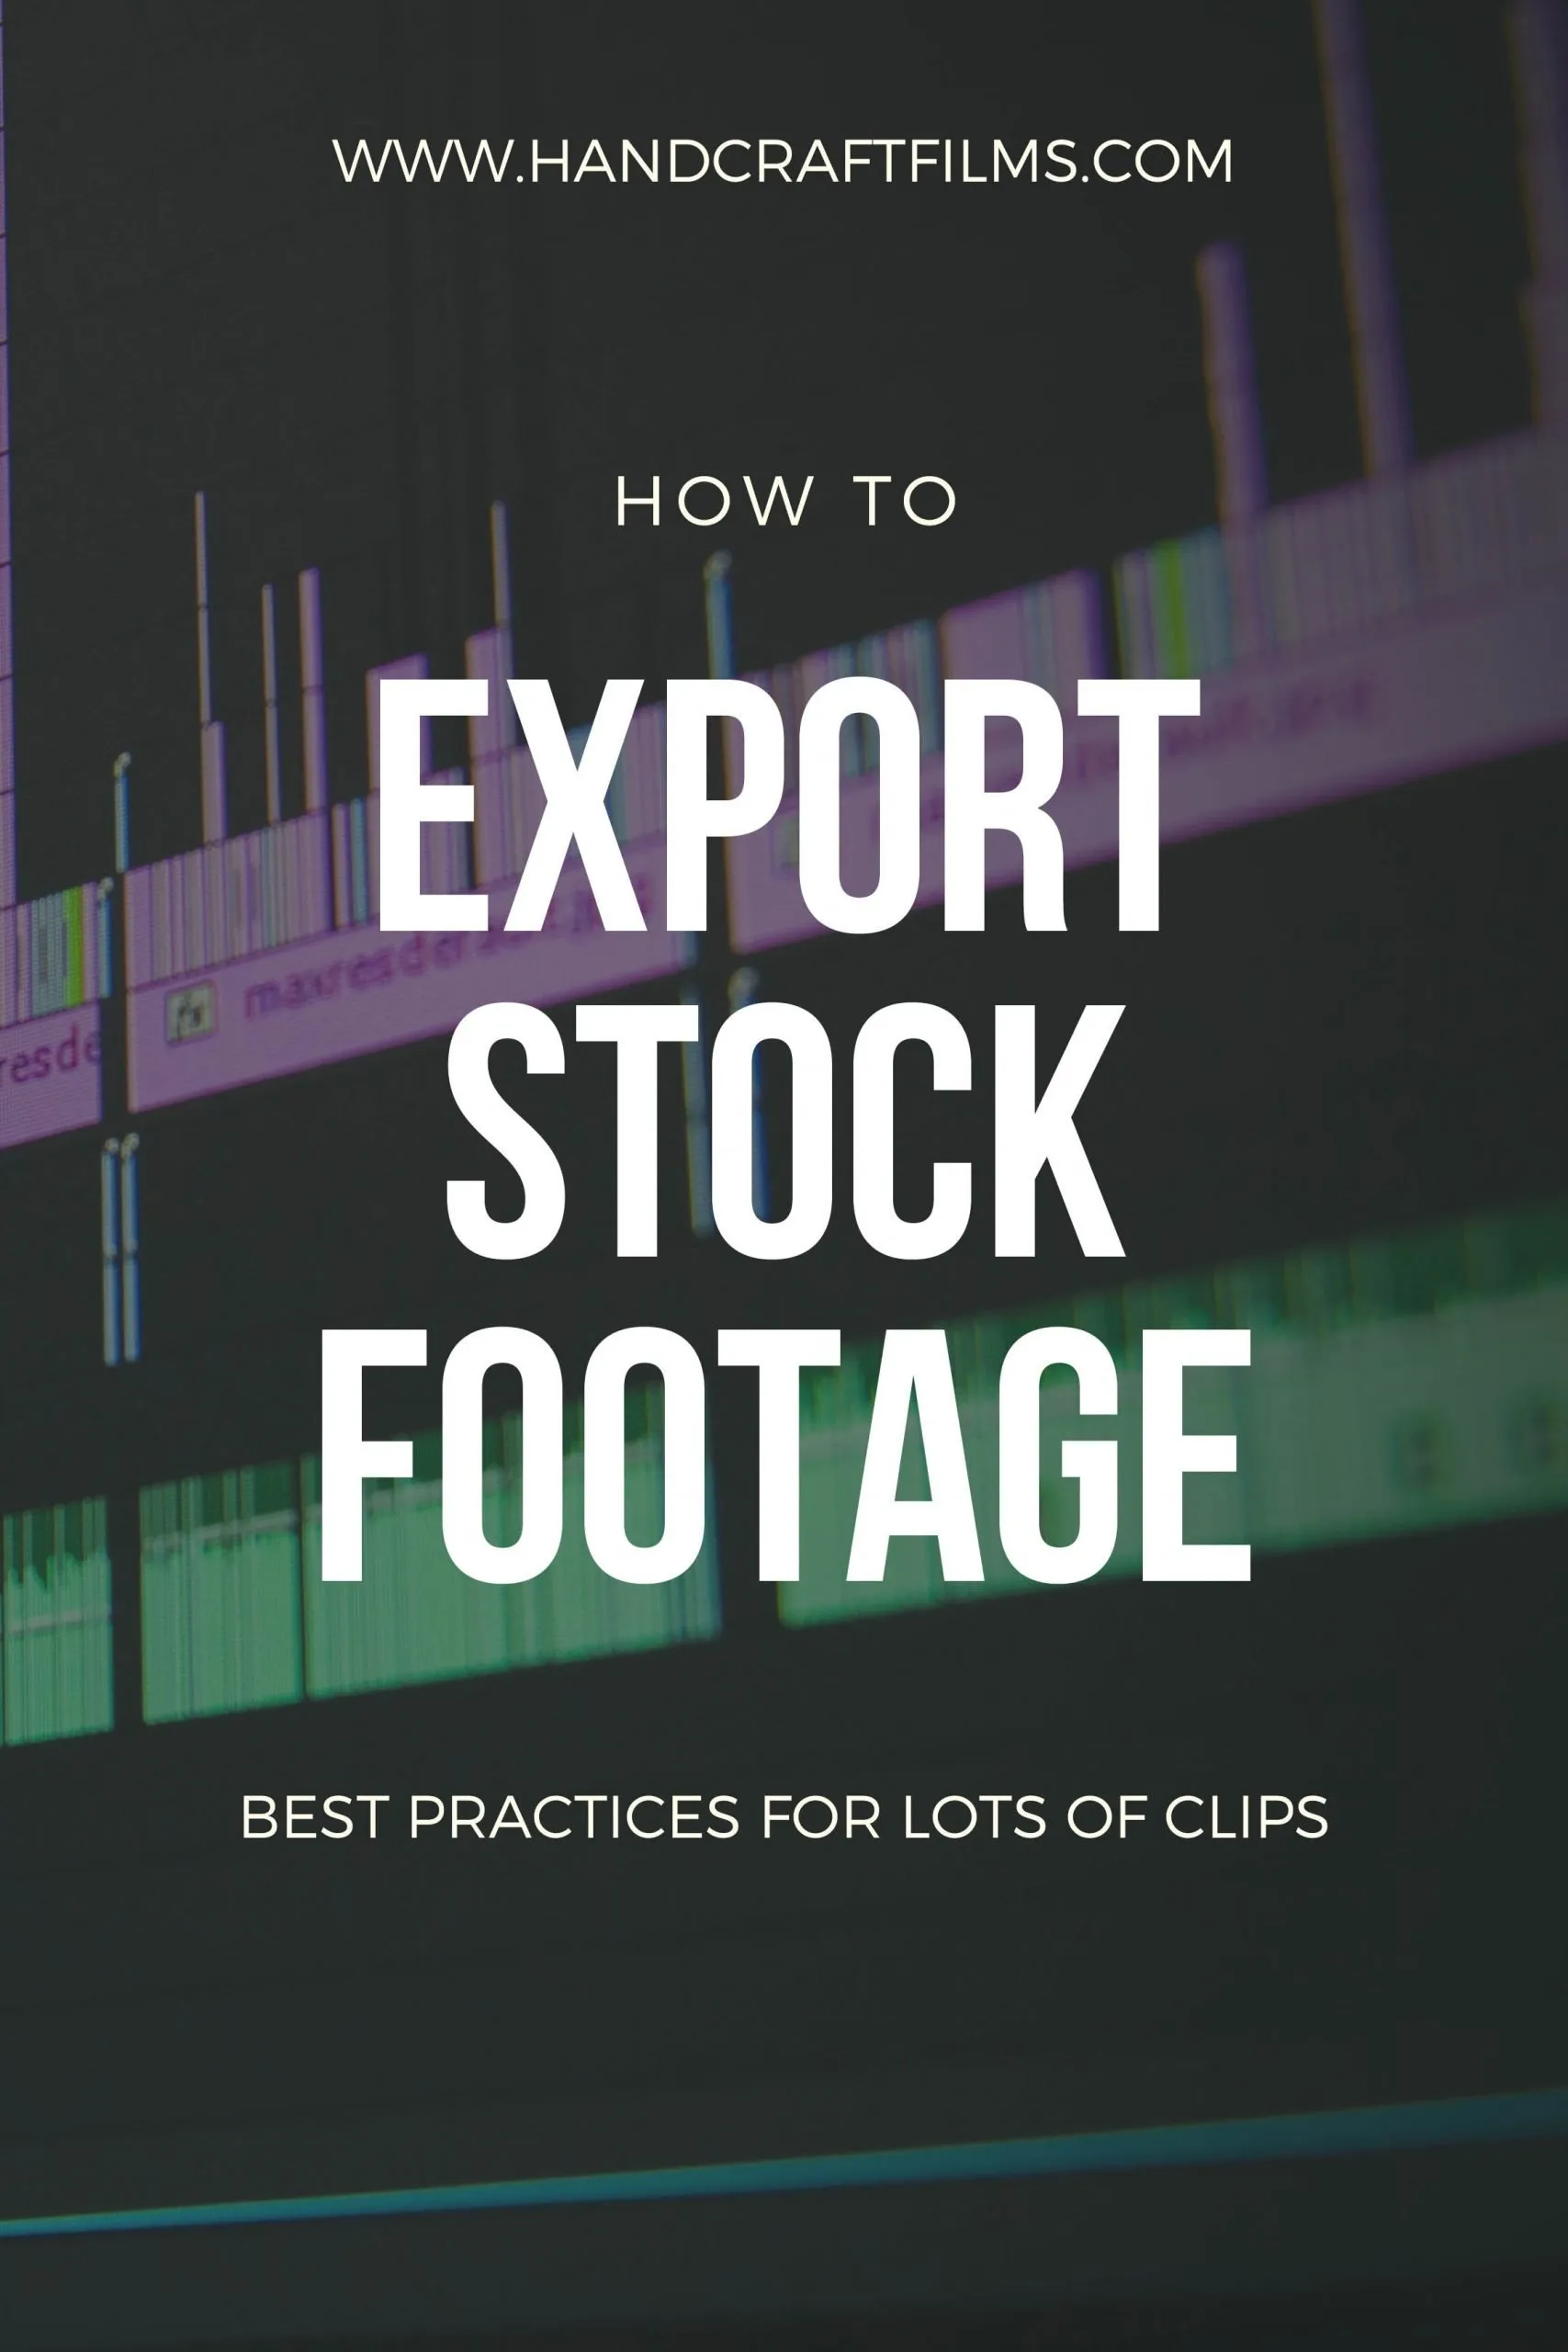 How to Export Stock Footage